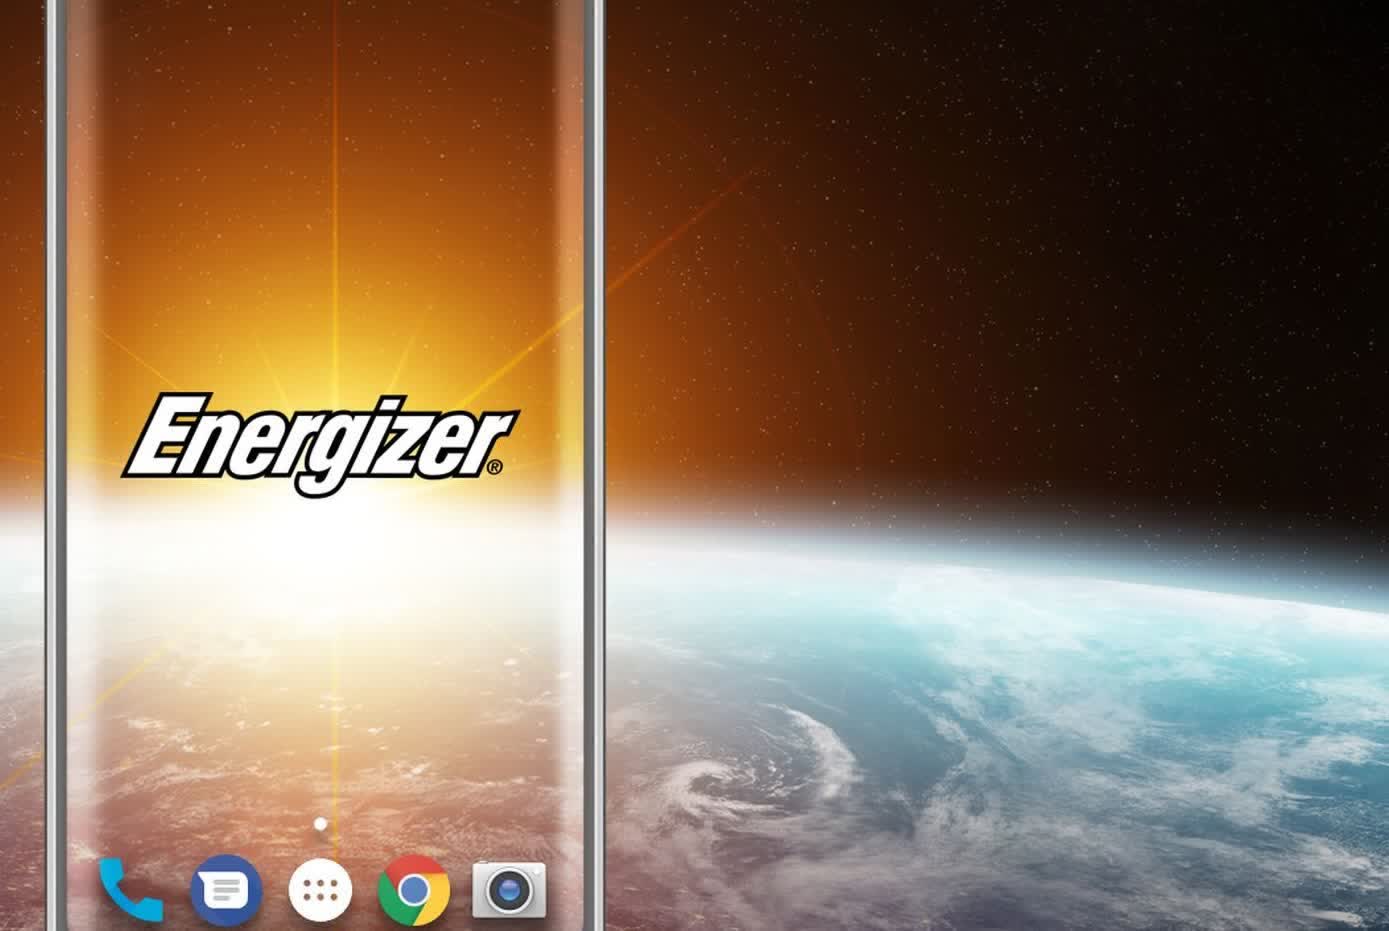 Energizer says its new phone has a huge battery but isn't a brick